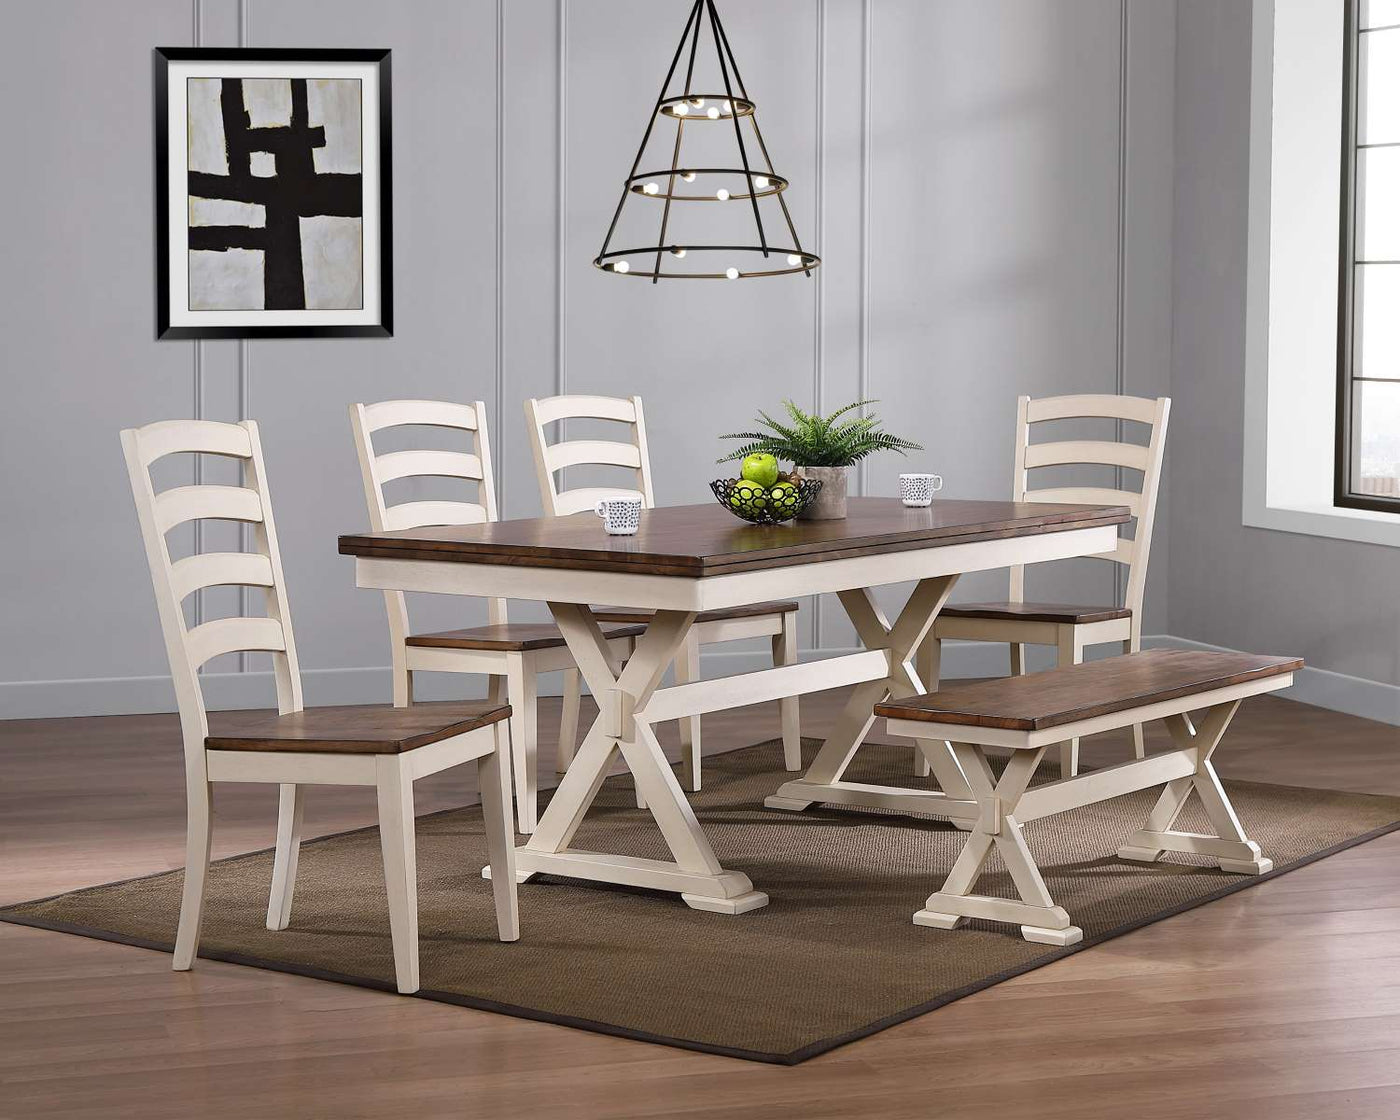 Mariana Dining Table - Antique White, Brown